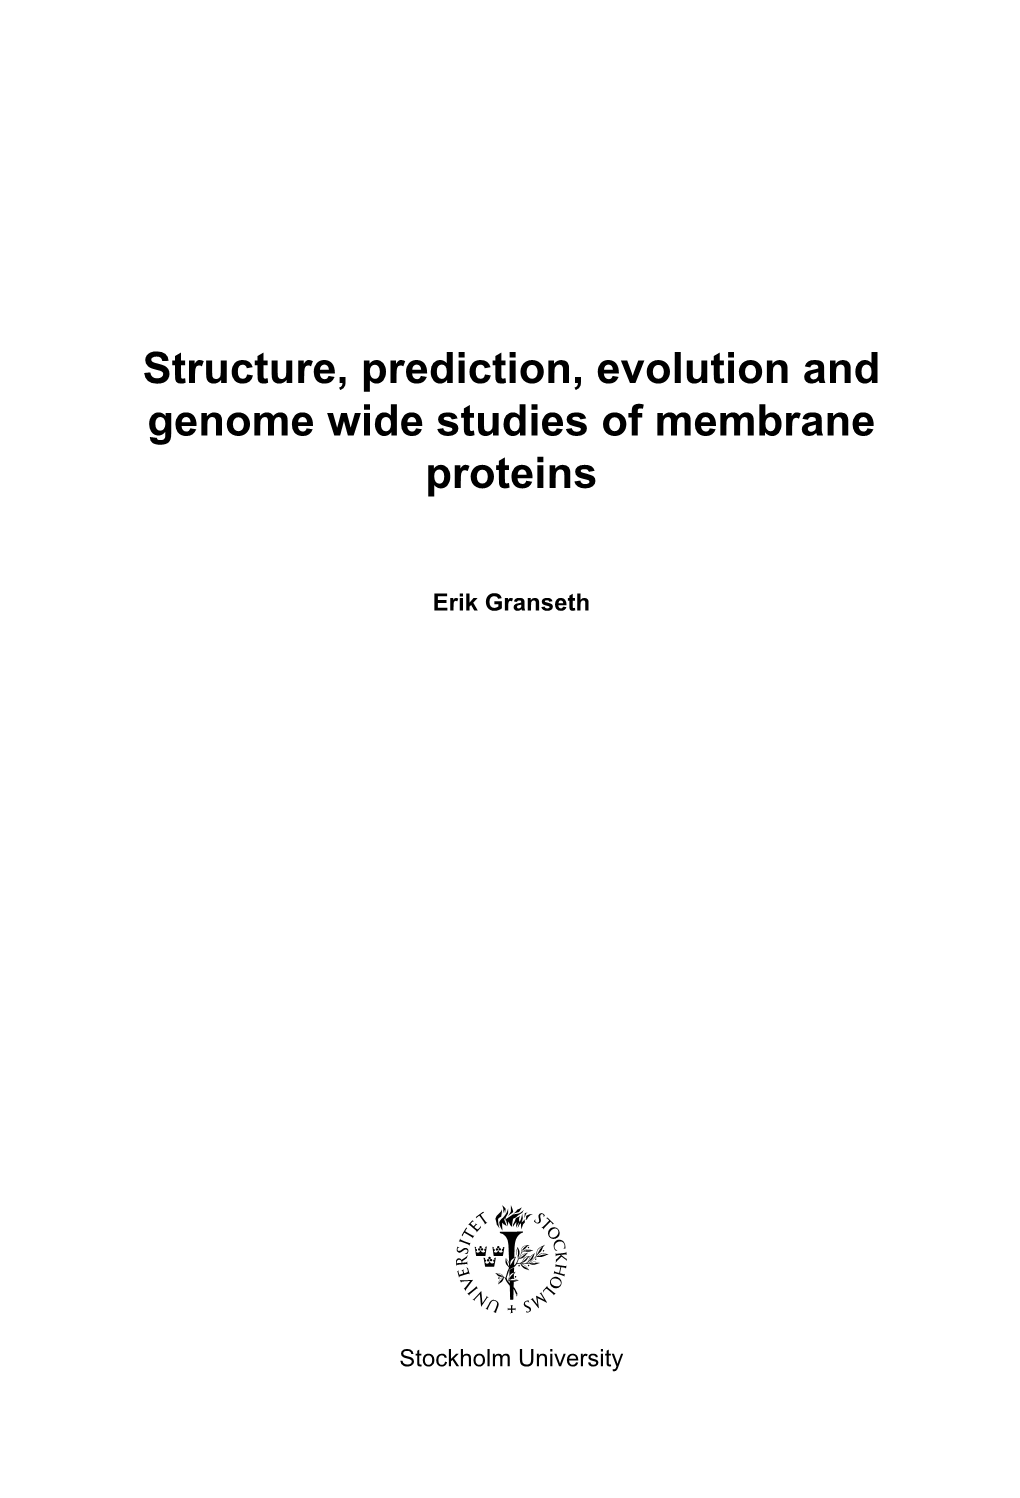 Structure, Prediction, Evolution and Genome Wide Studies of Membrane Proteins